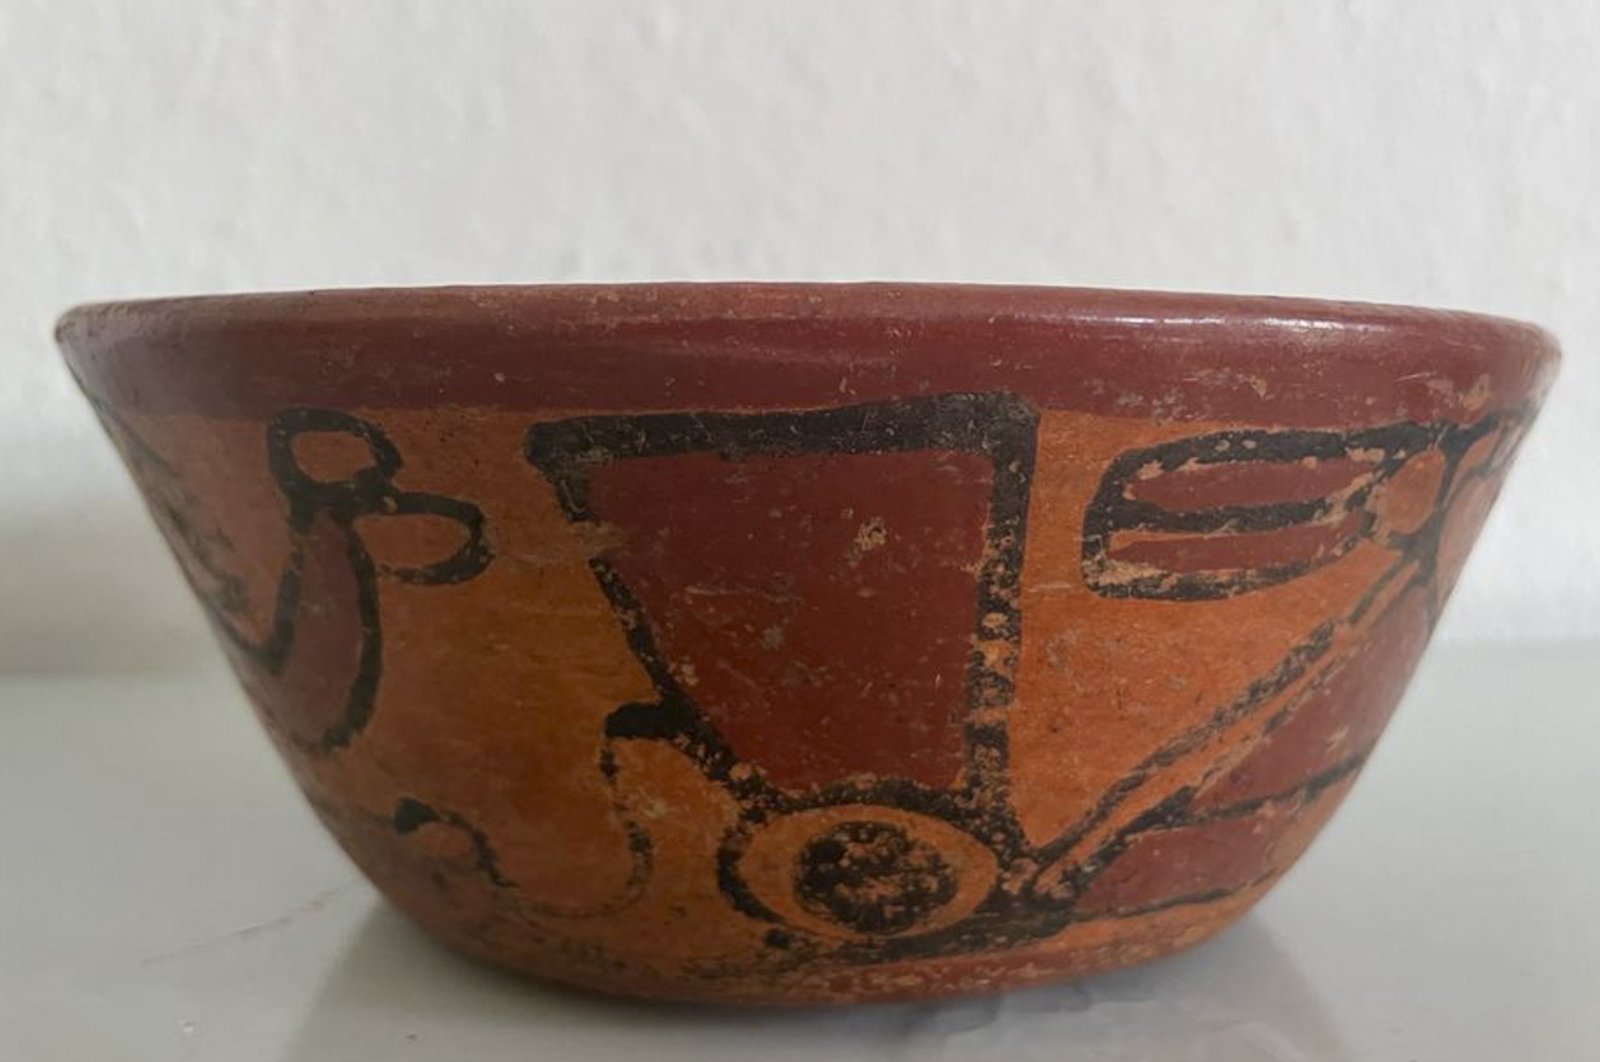 This handout picture released by the Guatemalan Embassy in Germany shows a Mayan vessel in Dusseldorf, Germany, Aug. 17, 2022. (AFP Photo)